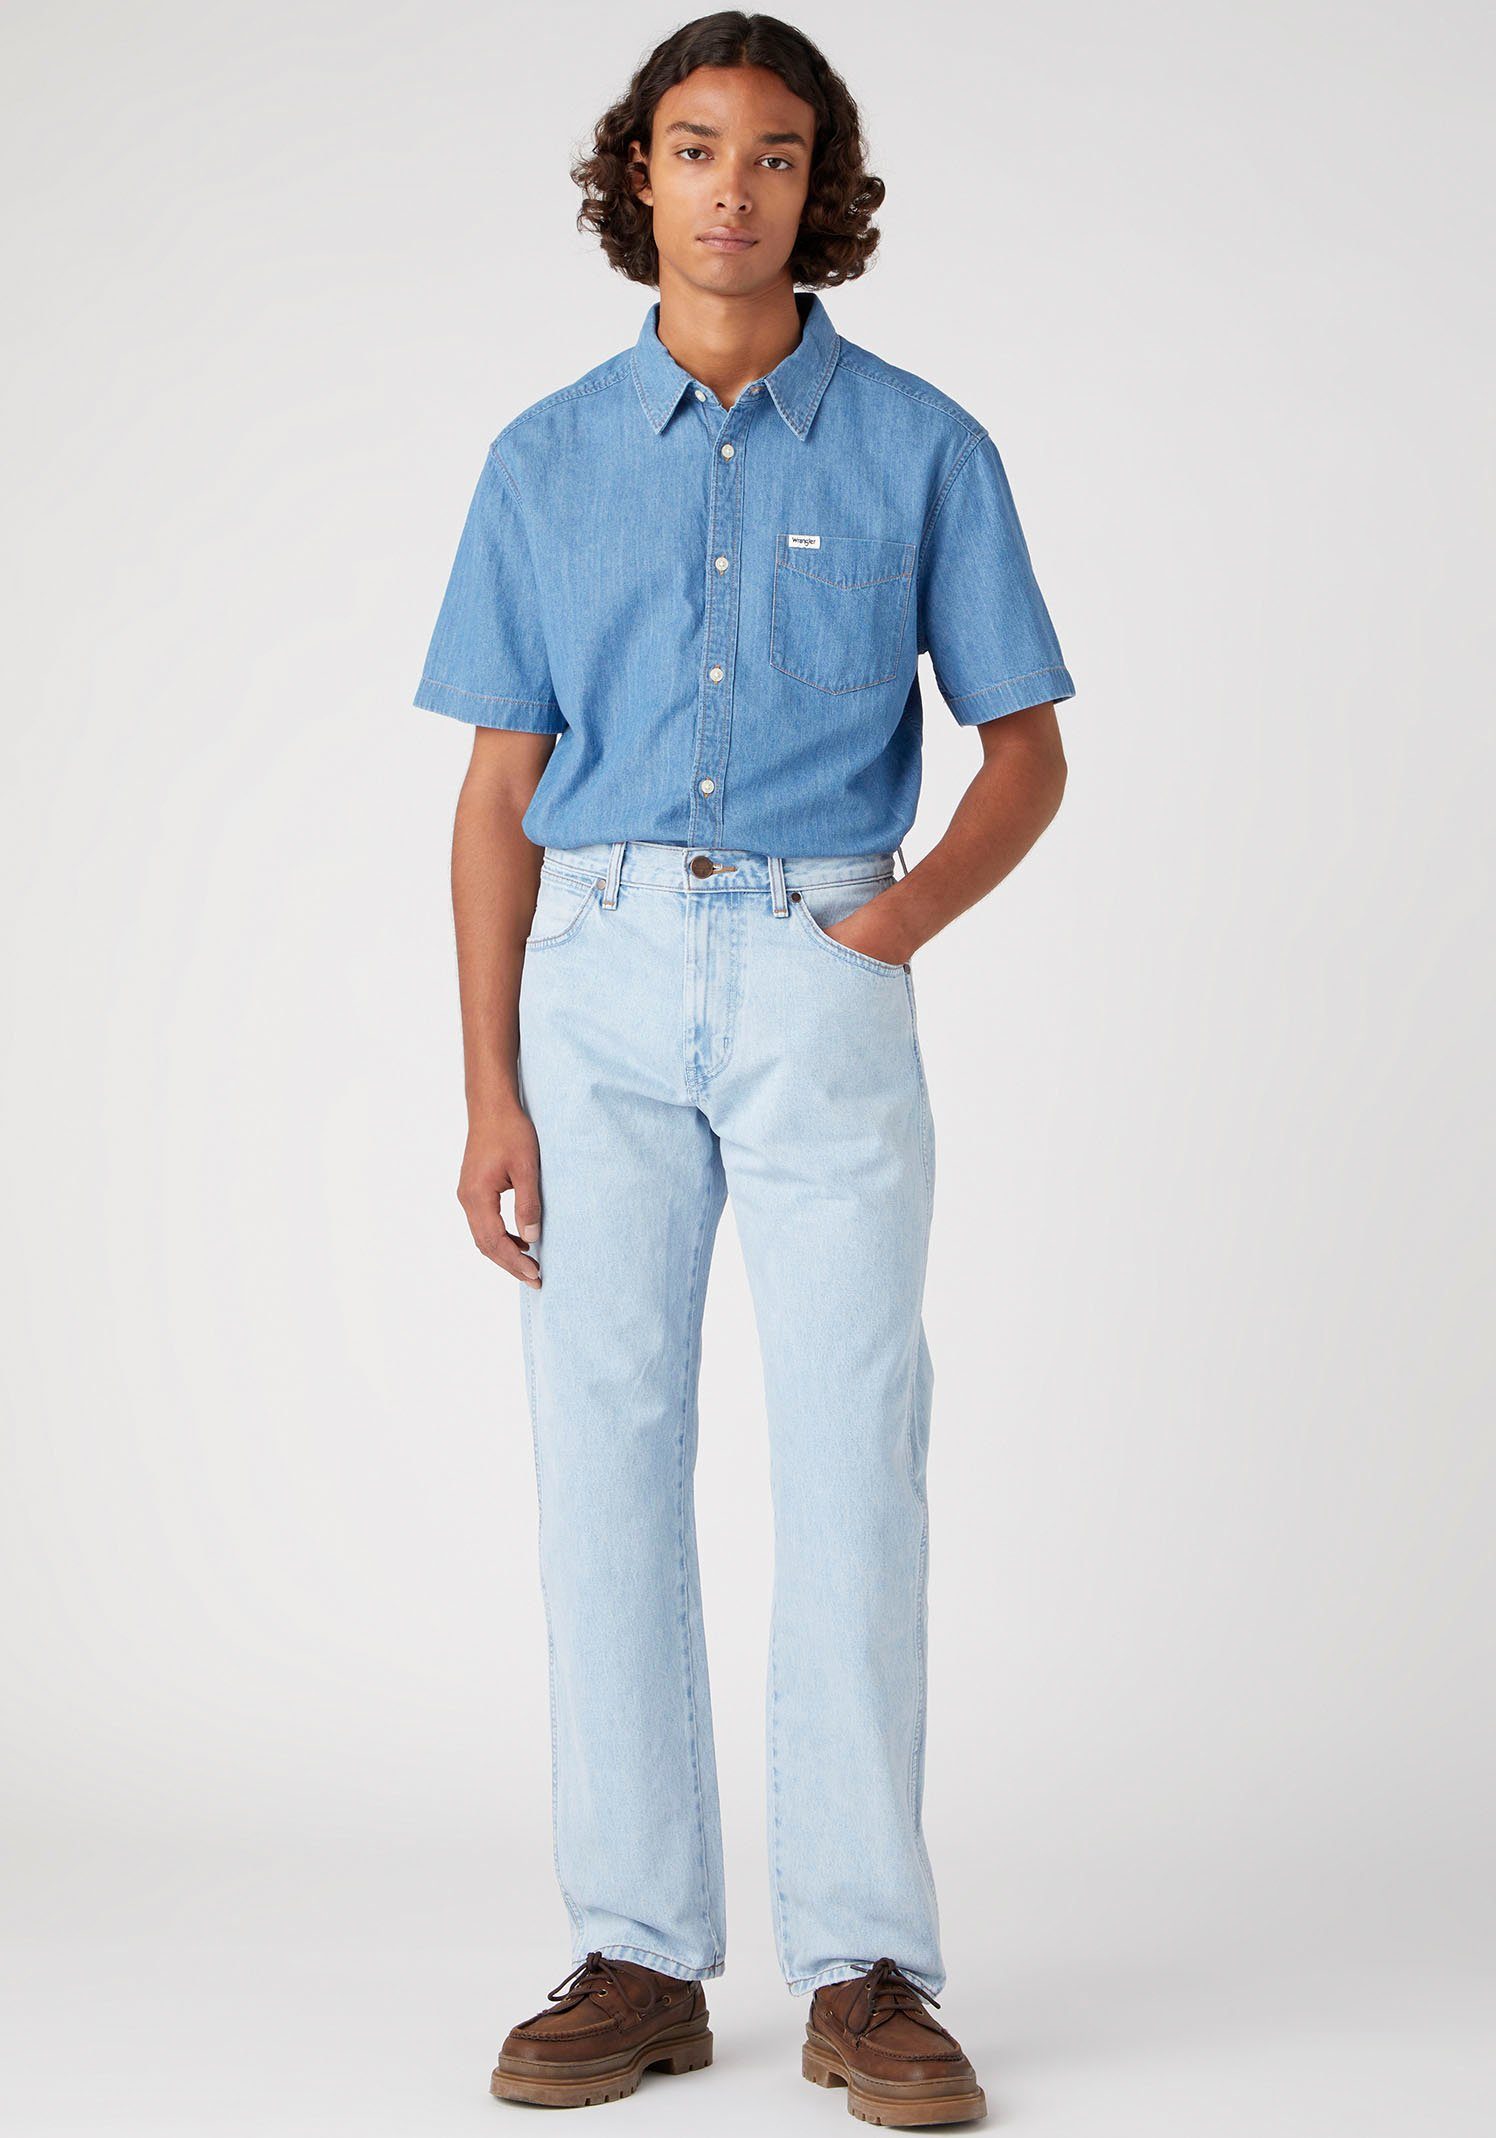 stone Frontier meadow Straight-Jeans Wrangler